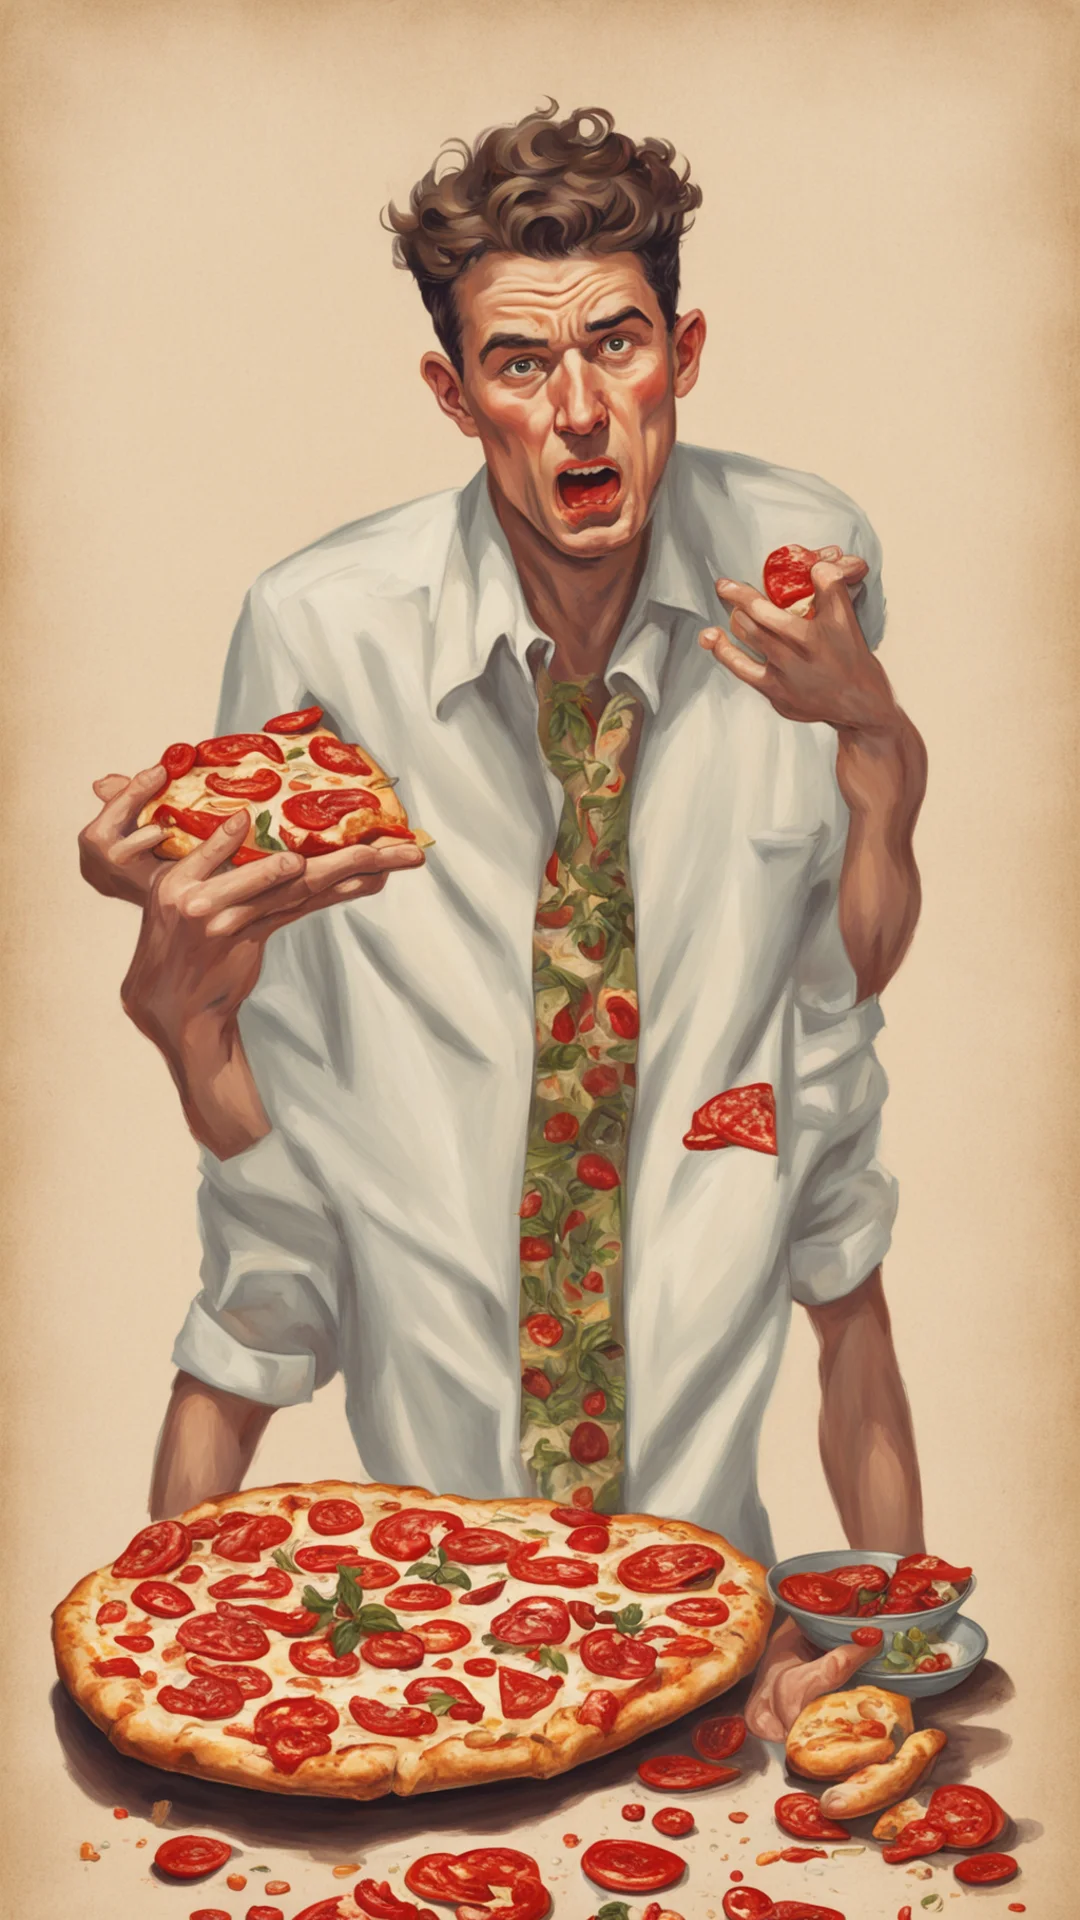 angry young man ravishing pizza in the style of norman rockwell amazing awesome portrait 2 tall